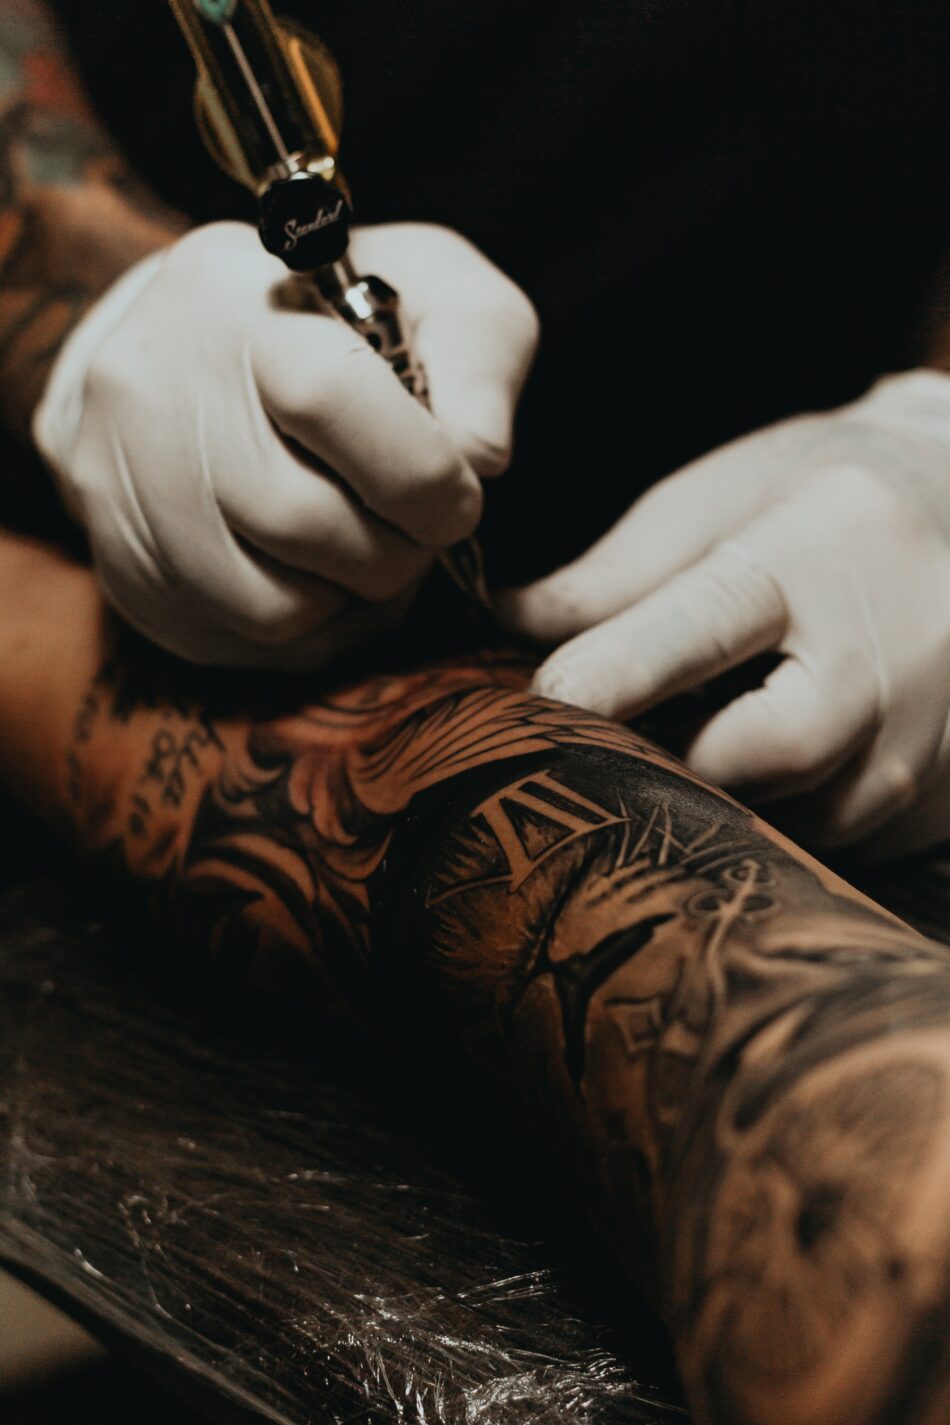 arm of man being tattoed.